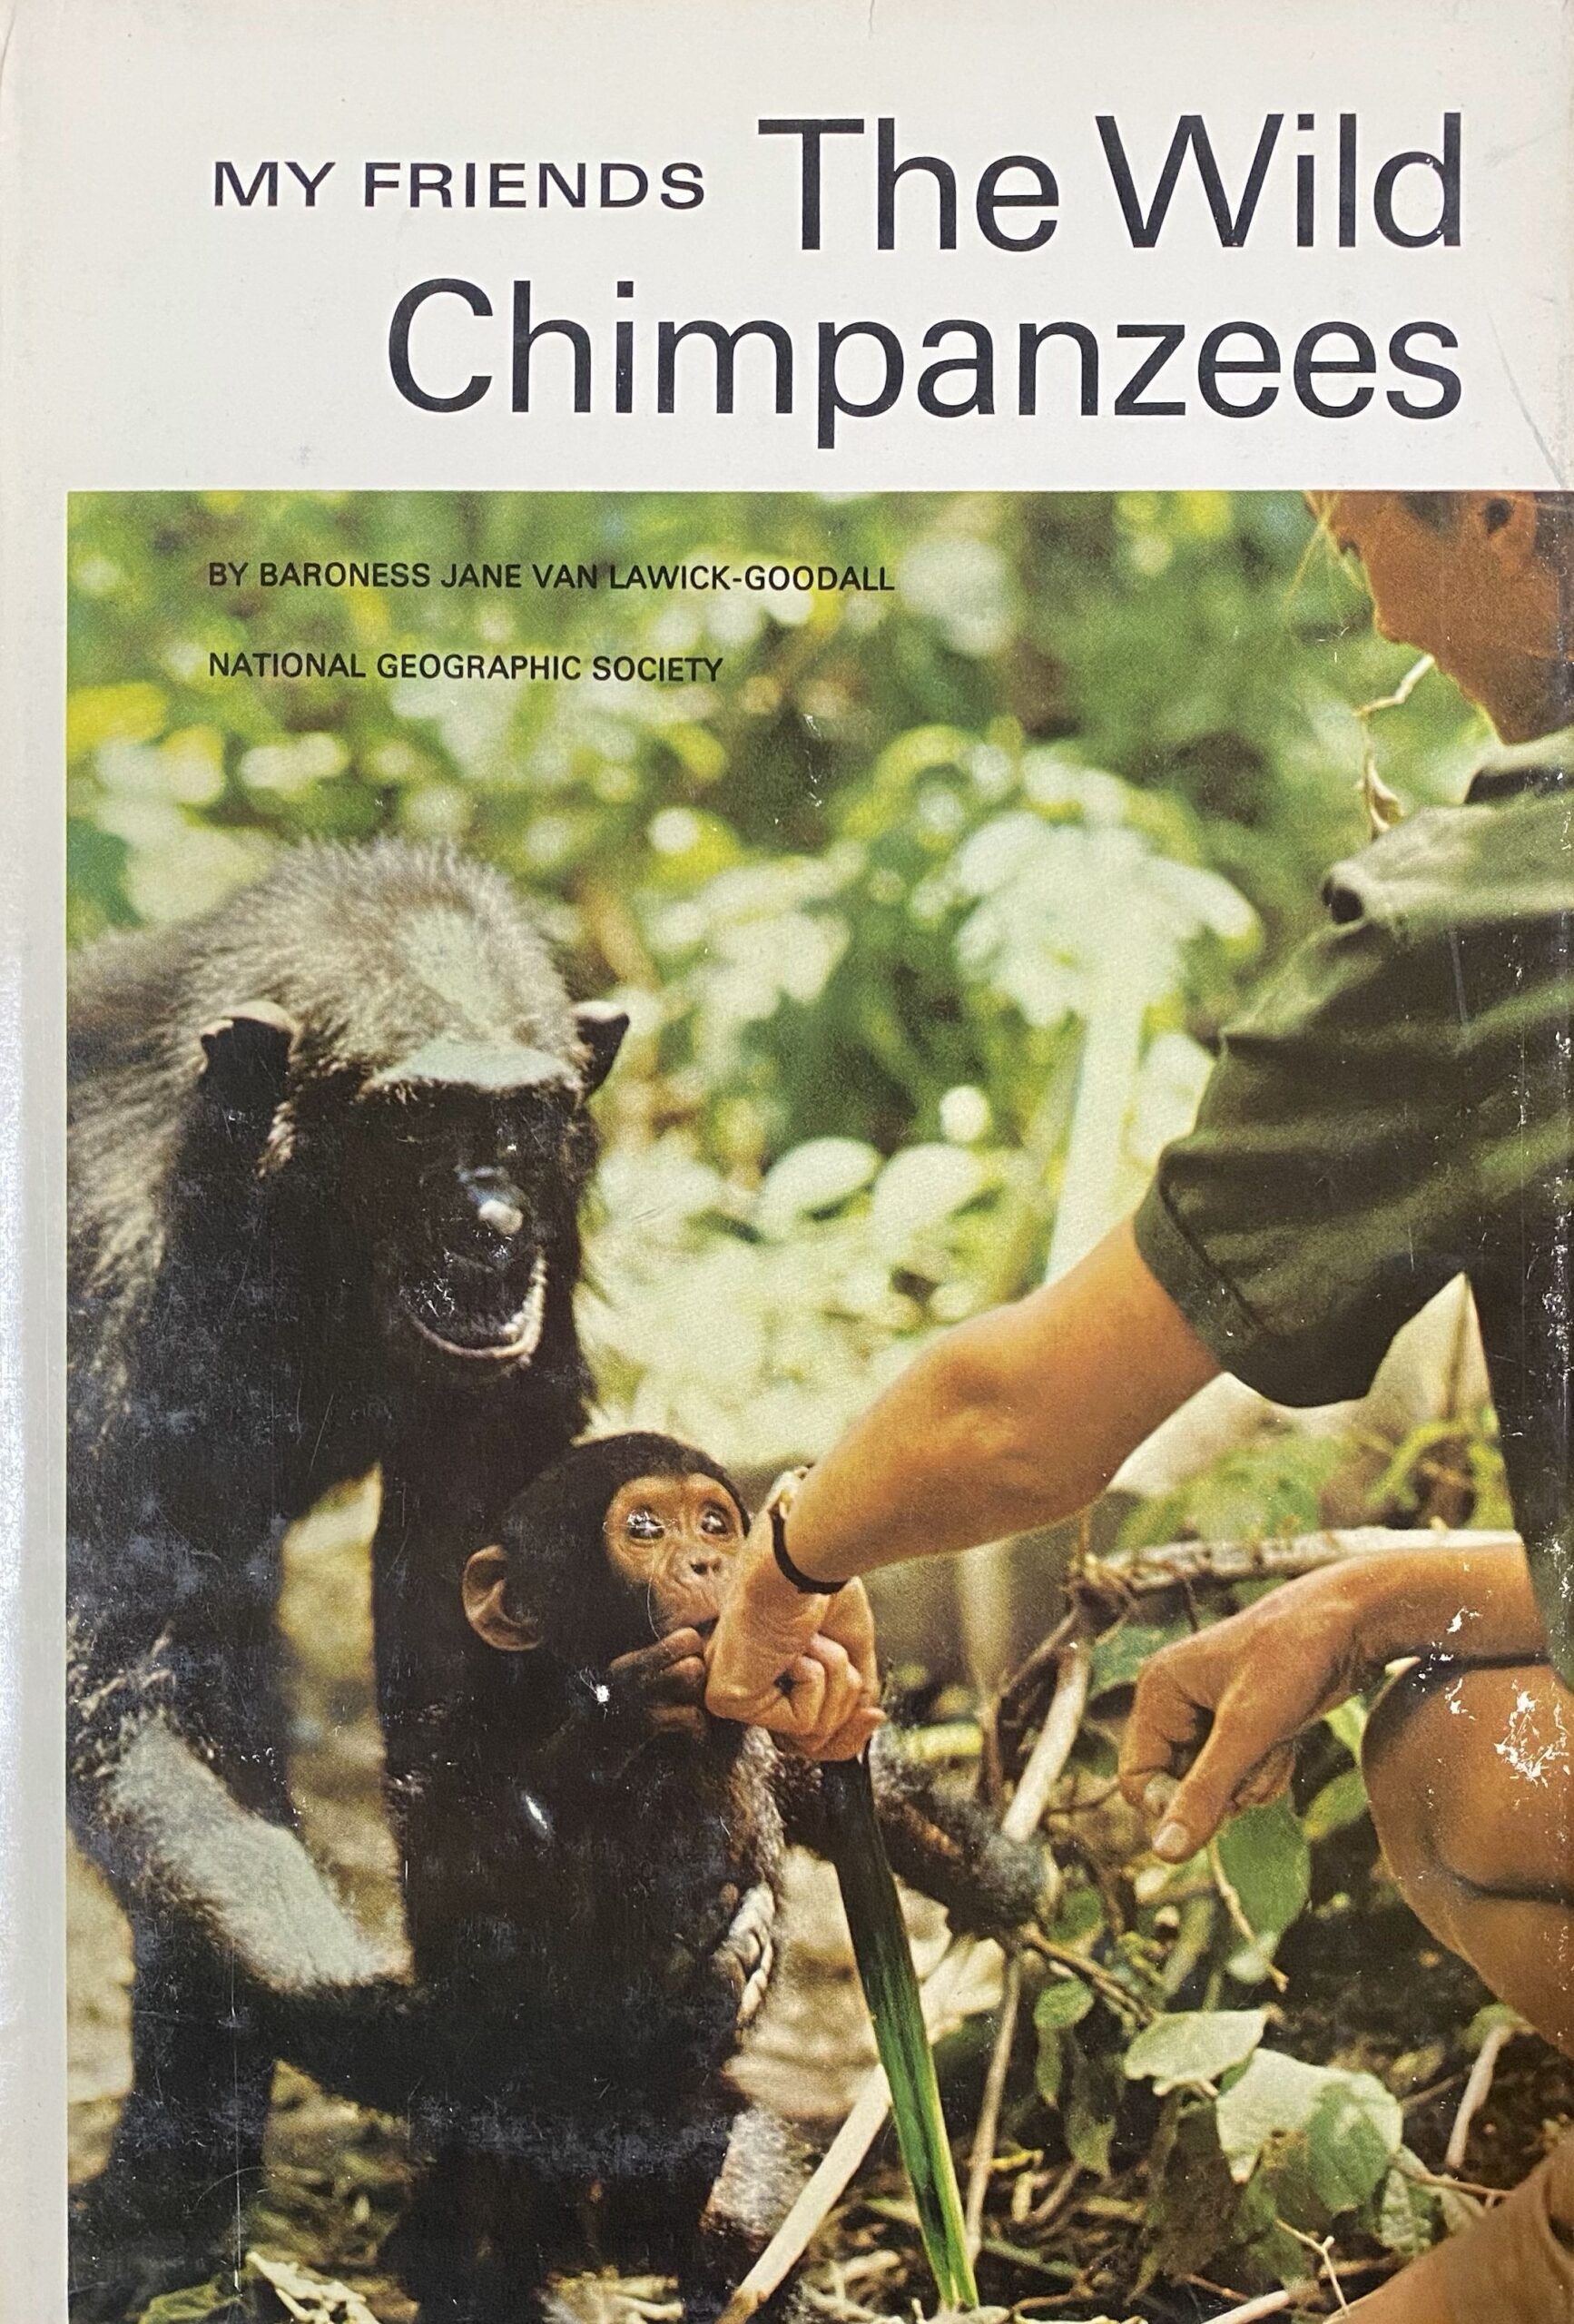 Link to My friends, the wild chimpanzees by Baroness Jane van Lawick-Goodall